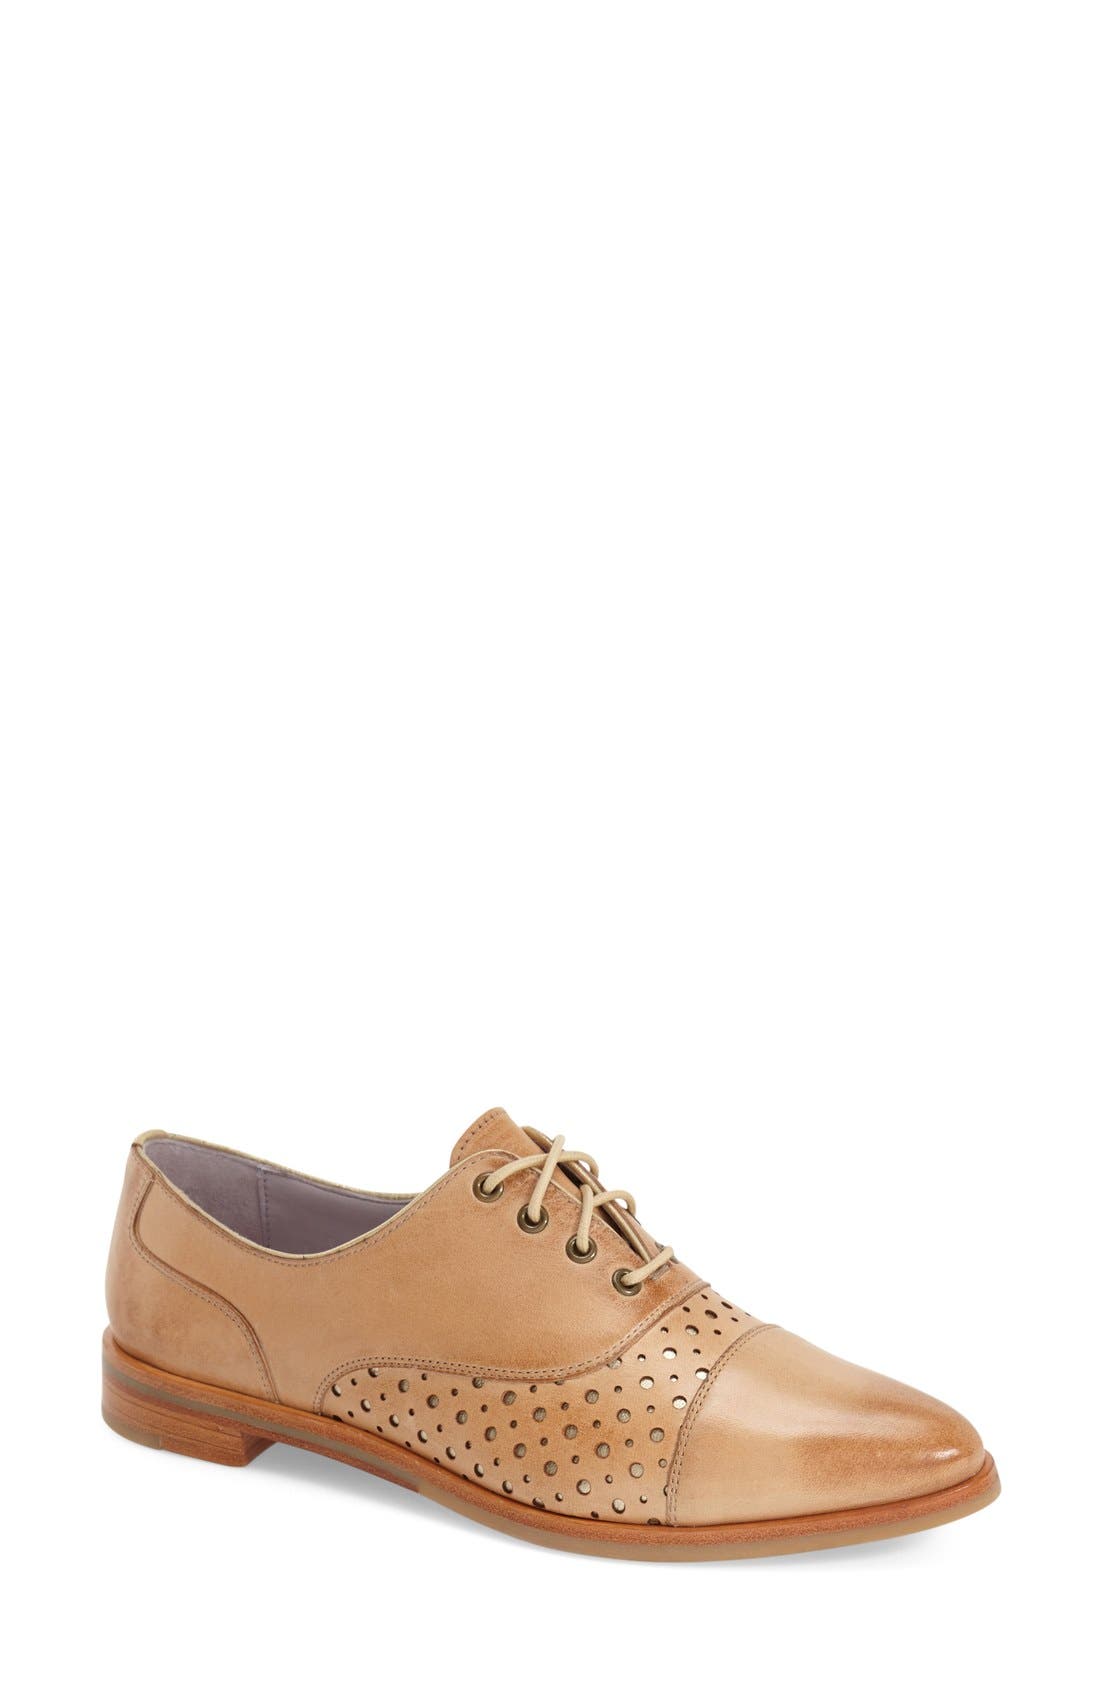 johnston and murphy womens oxfords